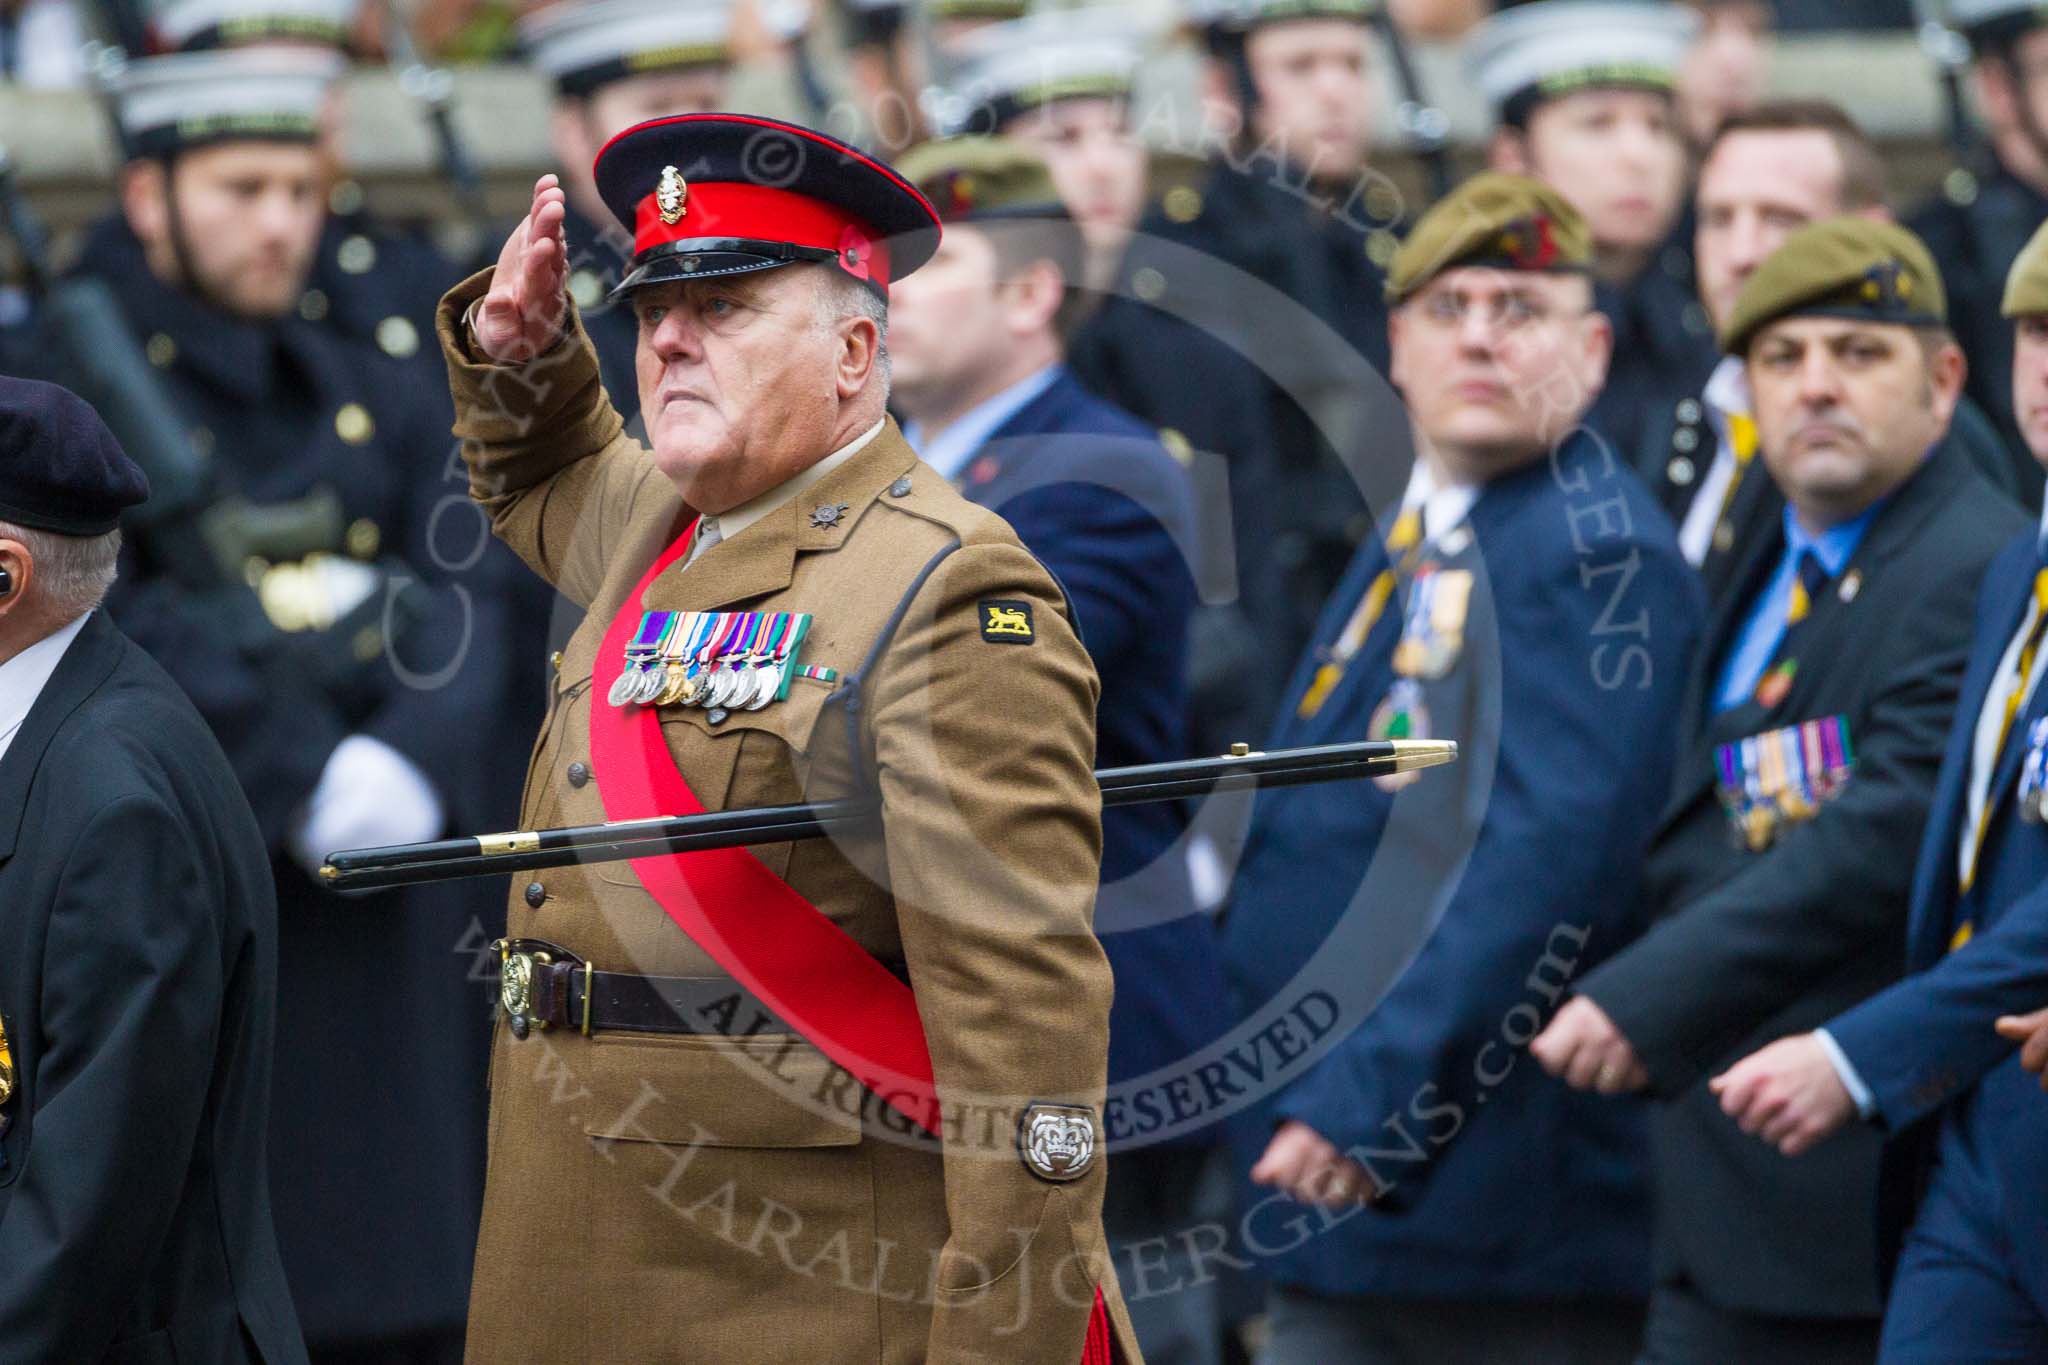 Remembrance Sunday at the Cenotaph 2015: Group A15, Princess of Wales's Royal Regiment.
Cenotaph, Whitehall, London SW1,
London,
Greater London,
United Kingdom,
on 08 November 2015 at 12:11, image #1307